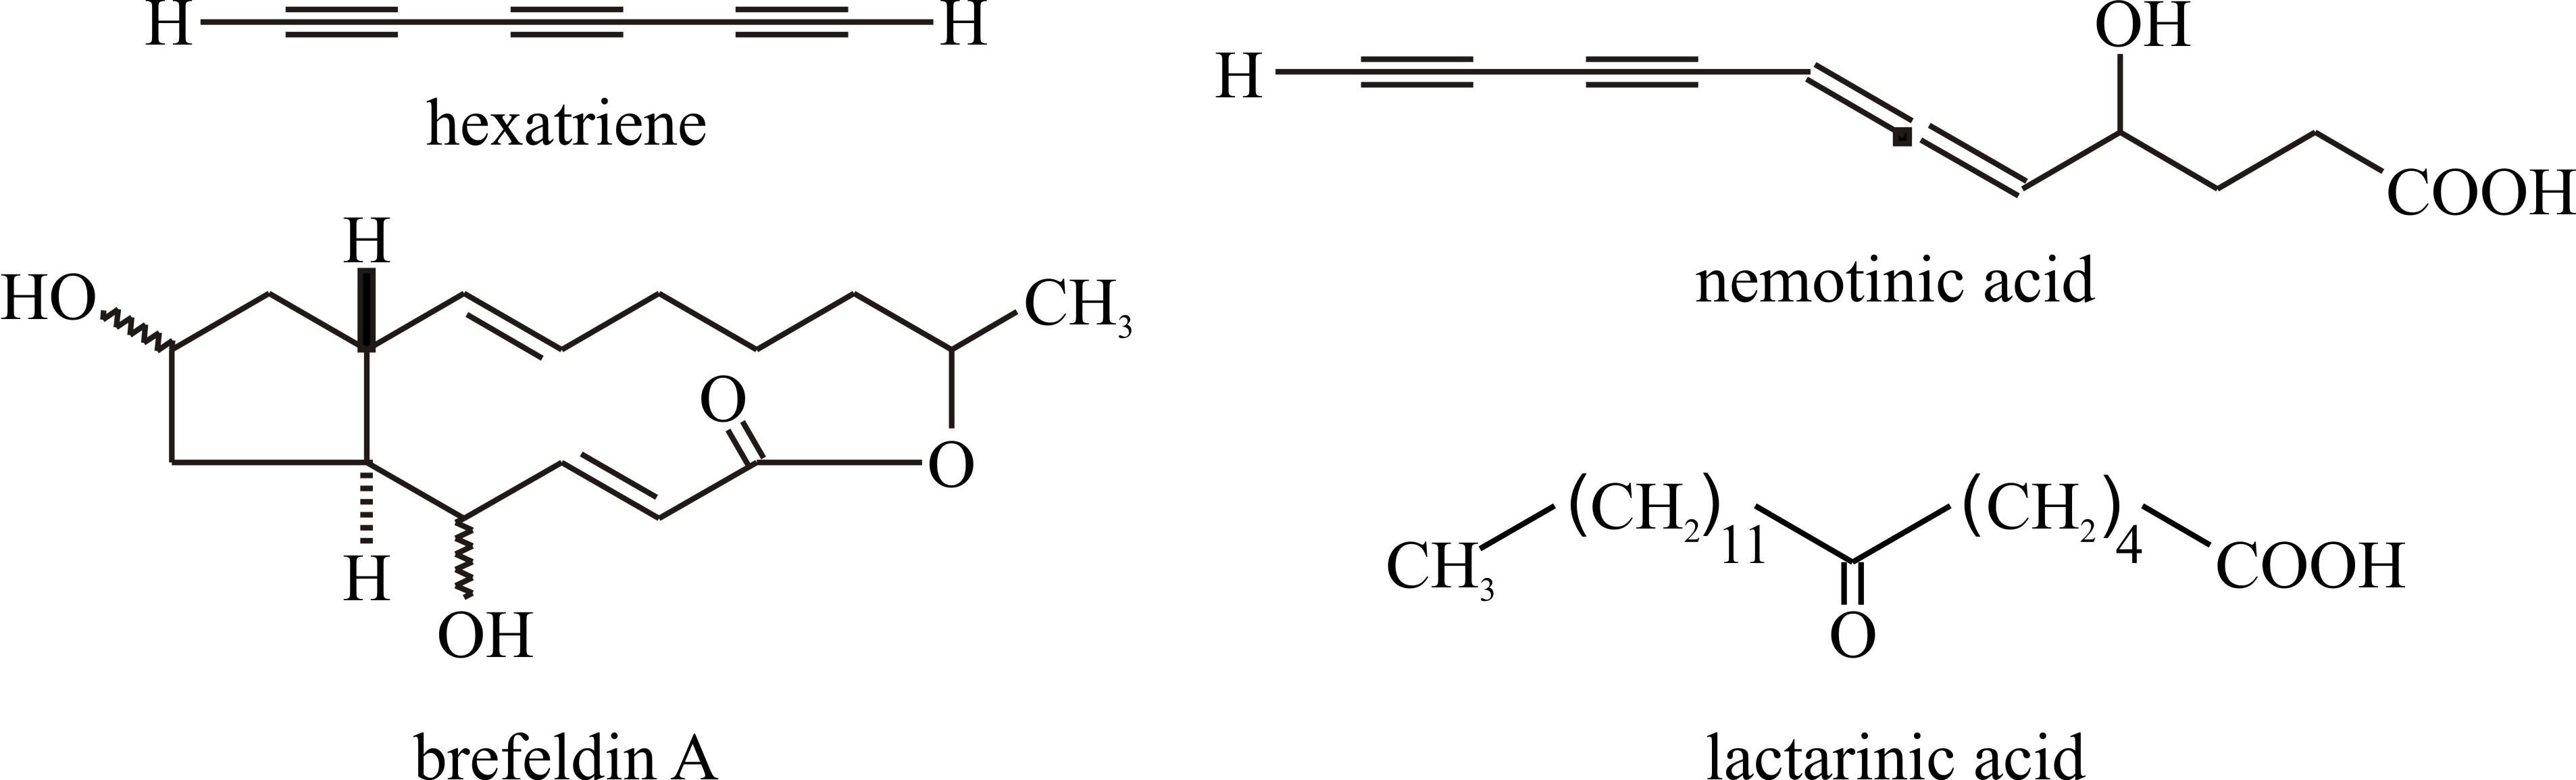 Chemical modification of fatty acids produces a variety of secondary metabolites including polyacetylenes and cyclopentanes